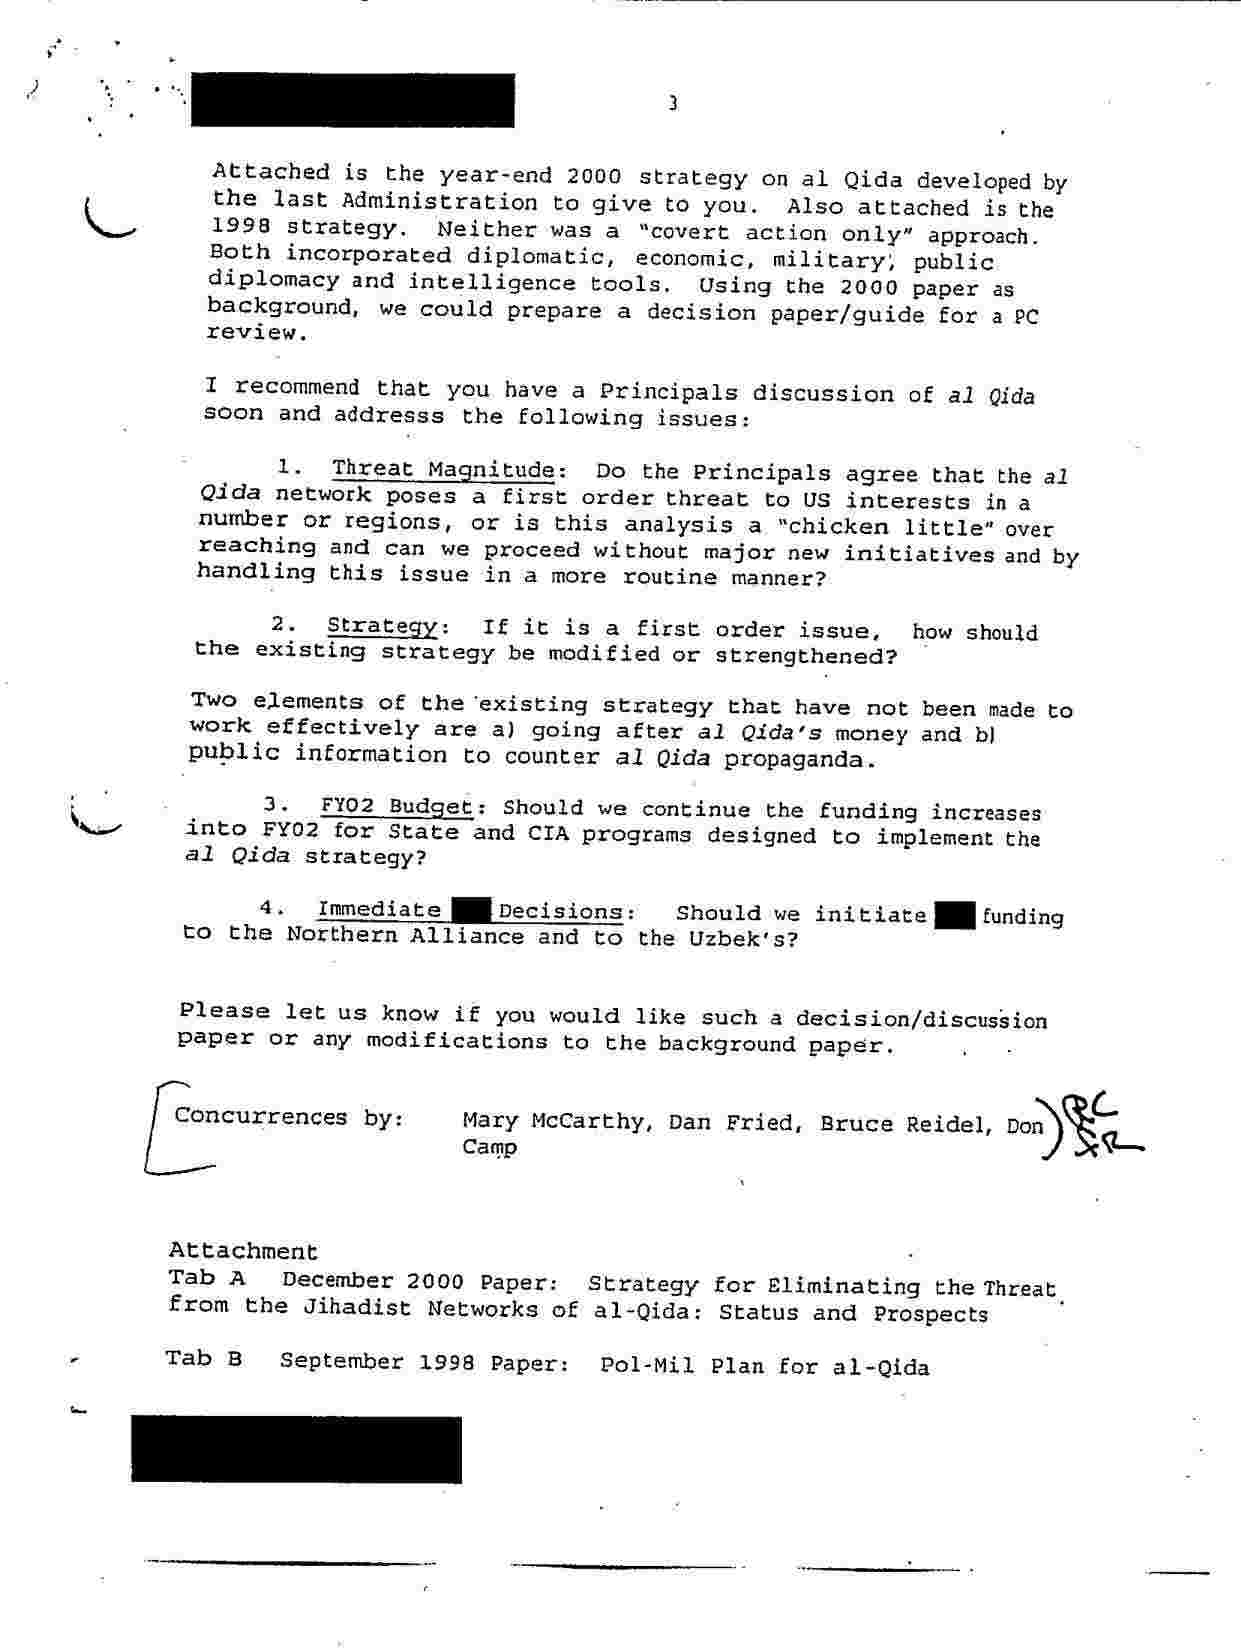 NSC memo page 3